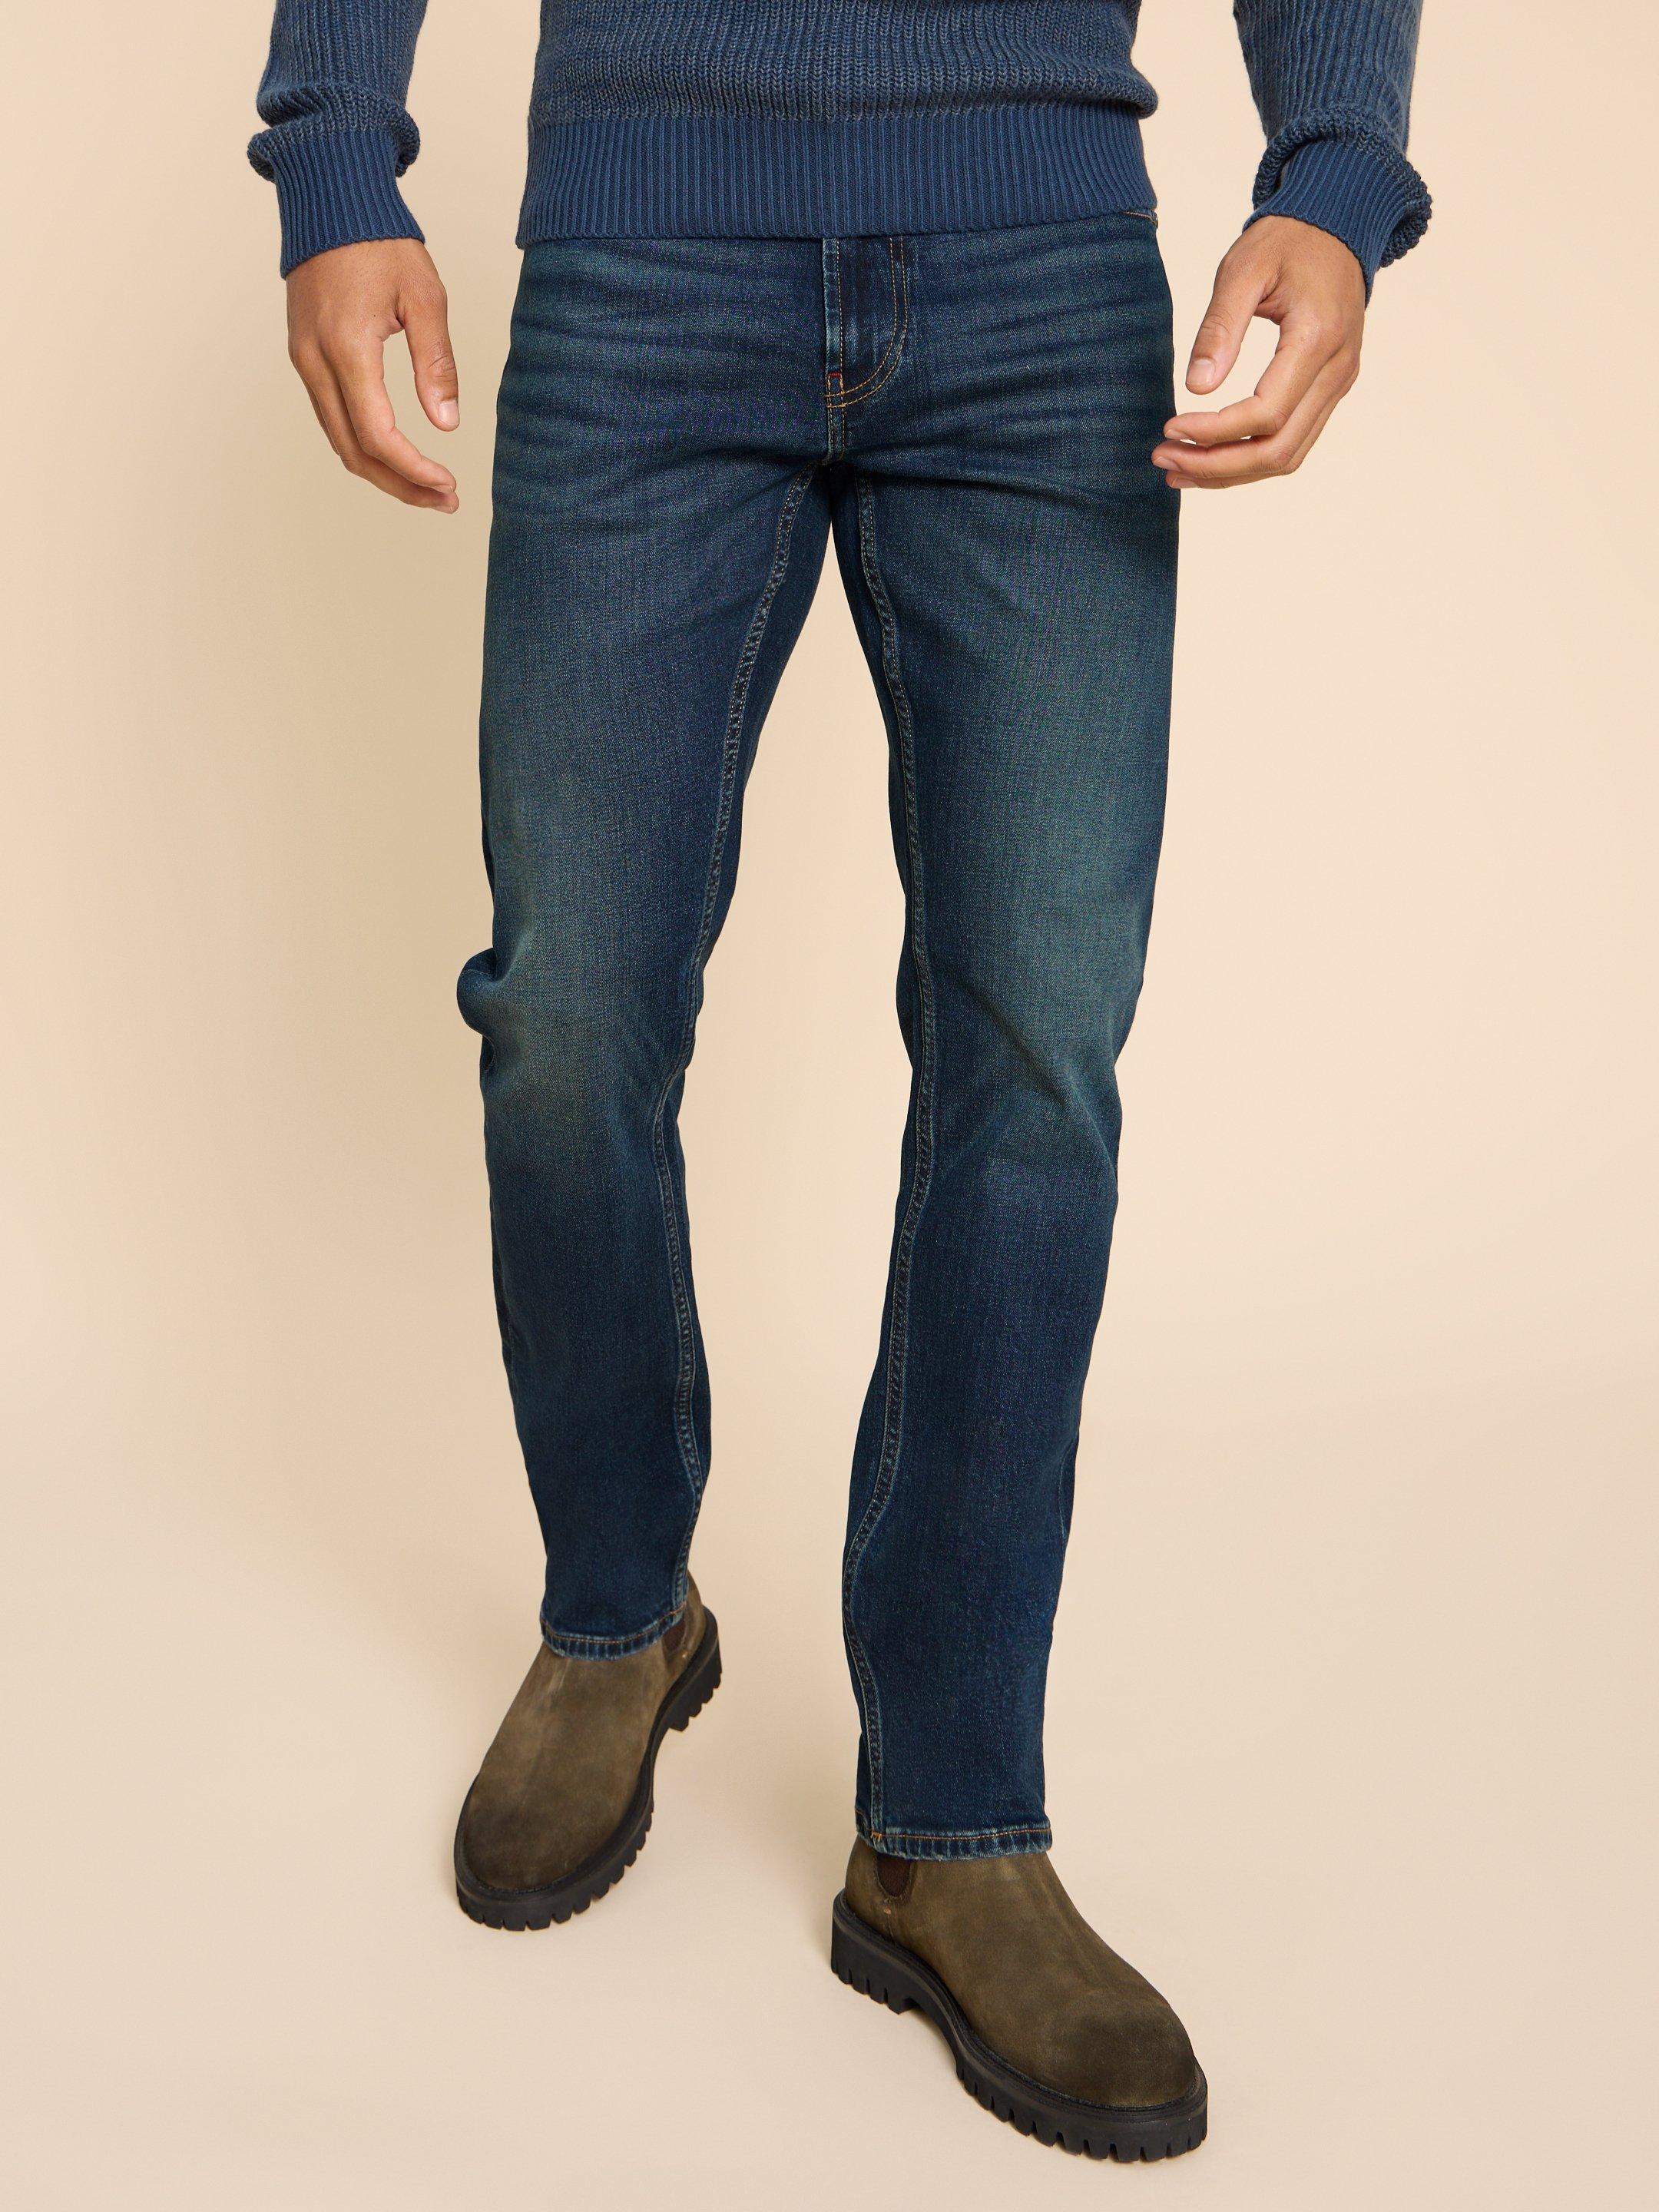 Eastwood Straight Jean Zip Fly in DK BLUE - LIFESTYLE